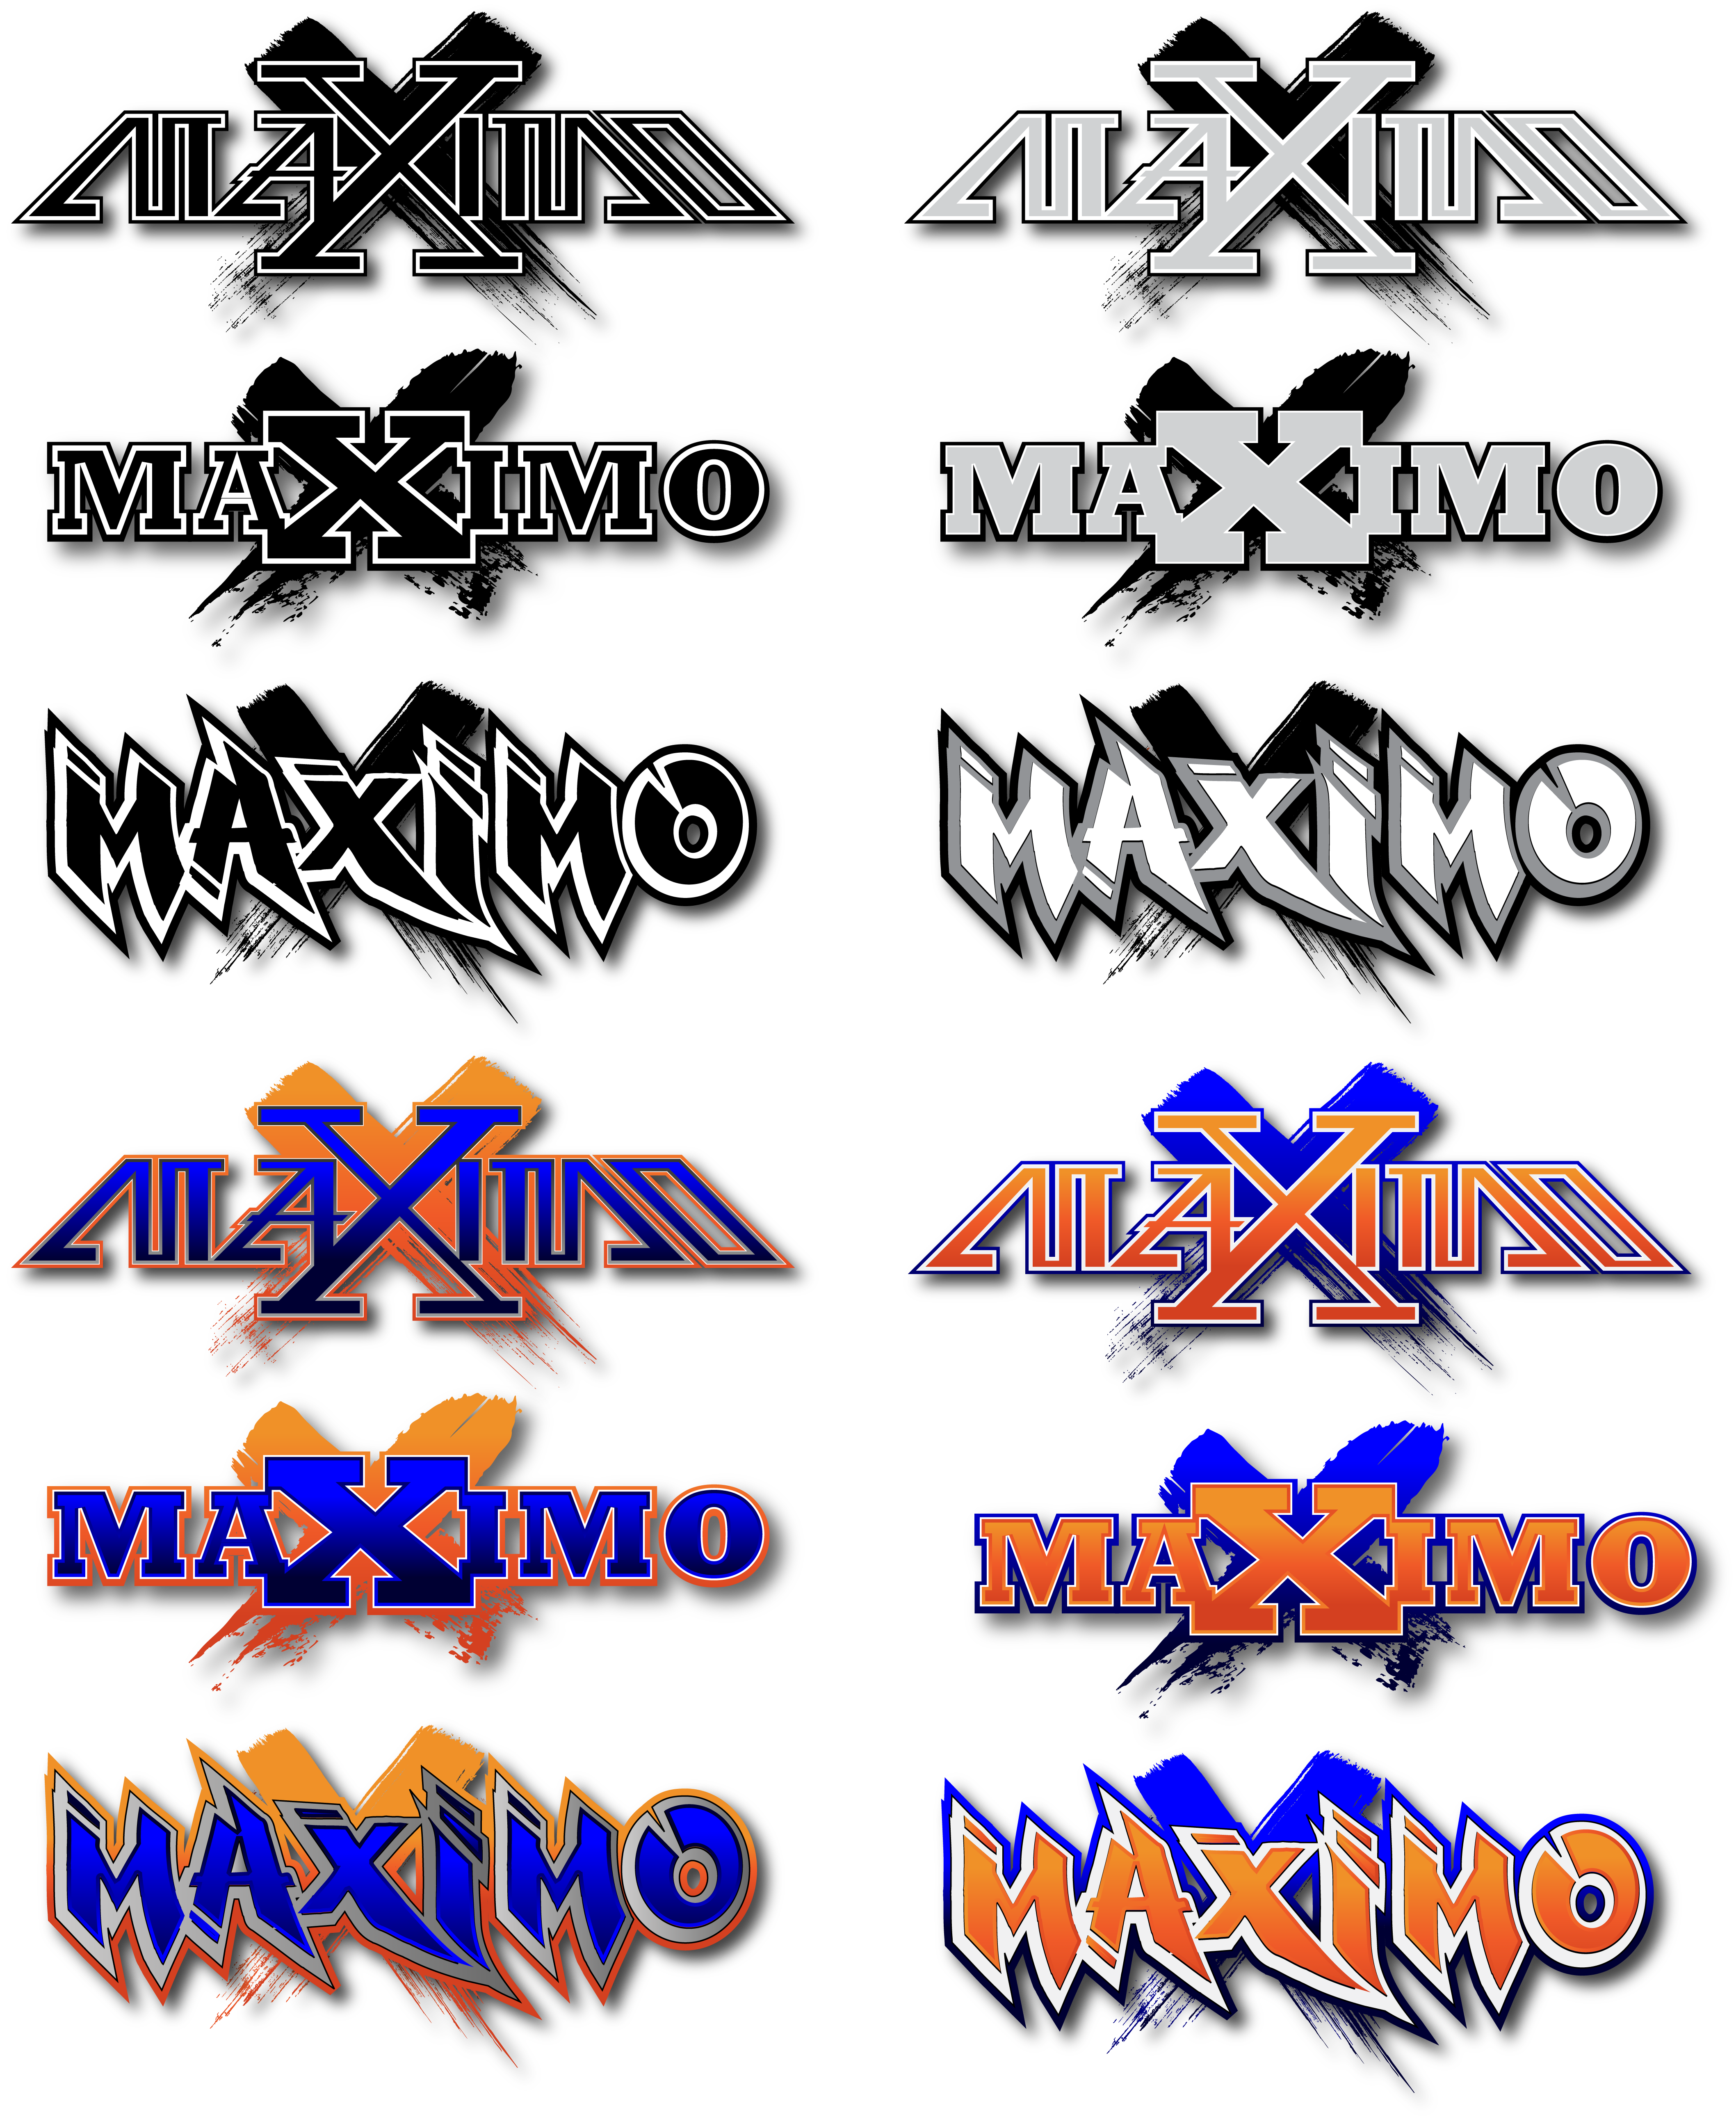 Maximo logo array in mid-development. I had about a dozen designs and a set of 6 color treatments that I provided across the array. This was in the last stage before choosing final artwork to refine & use.